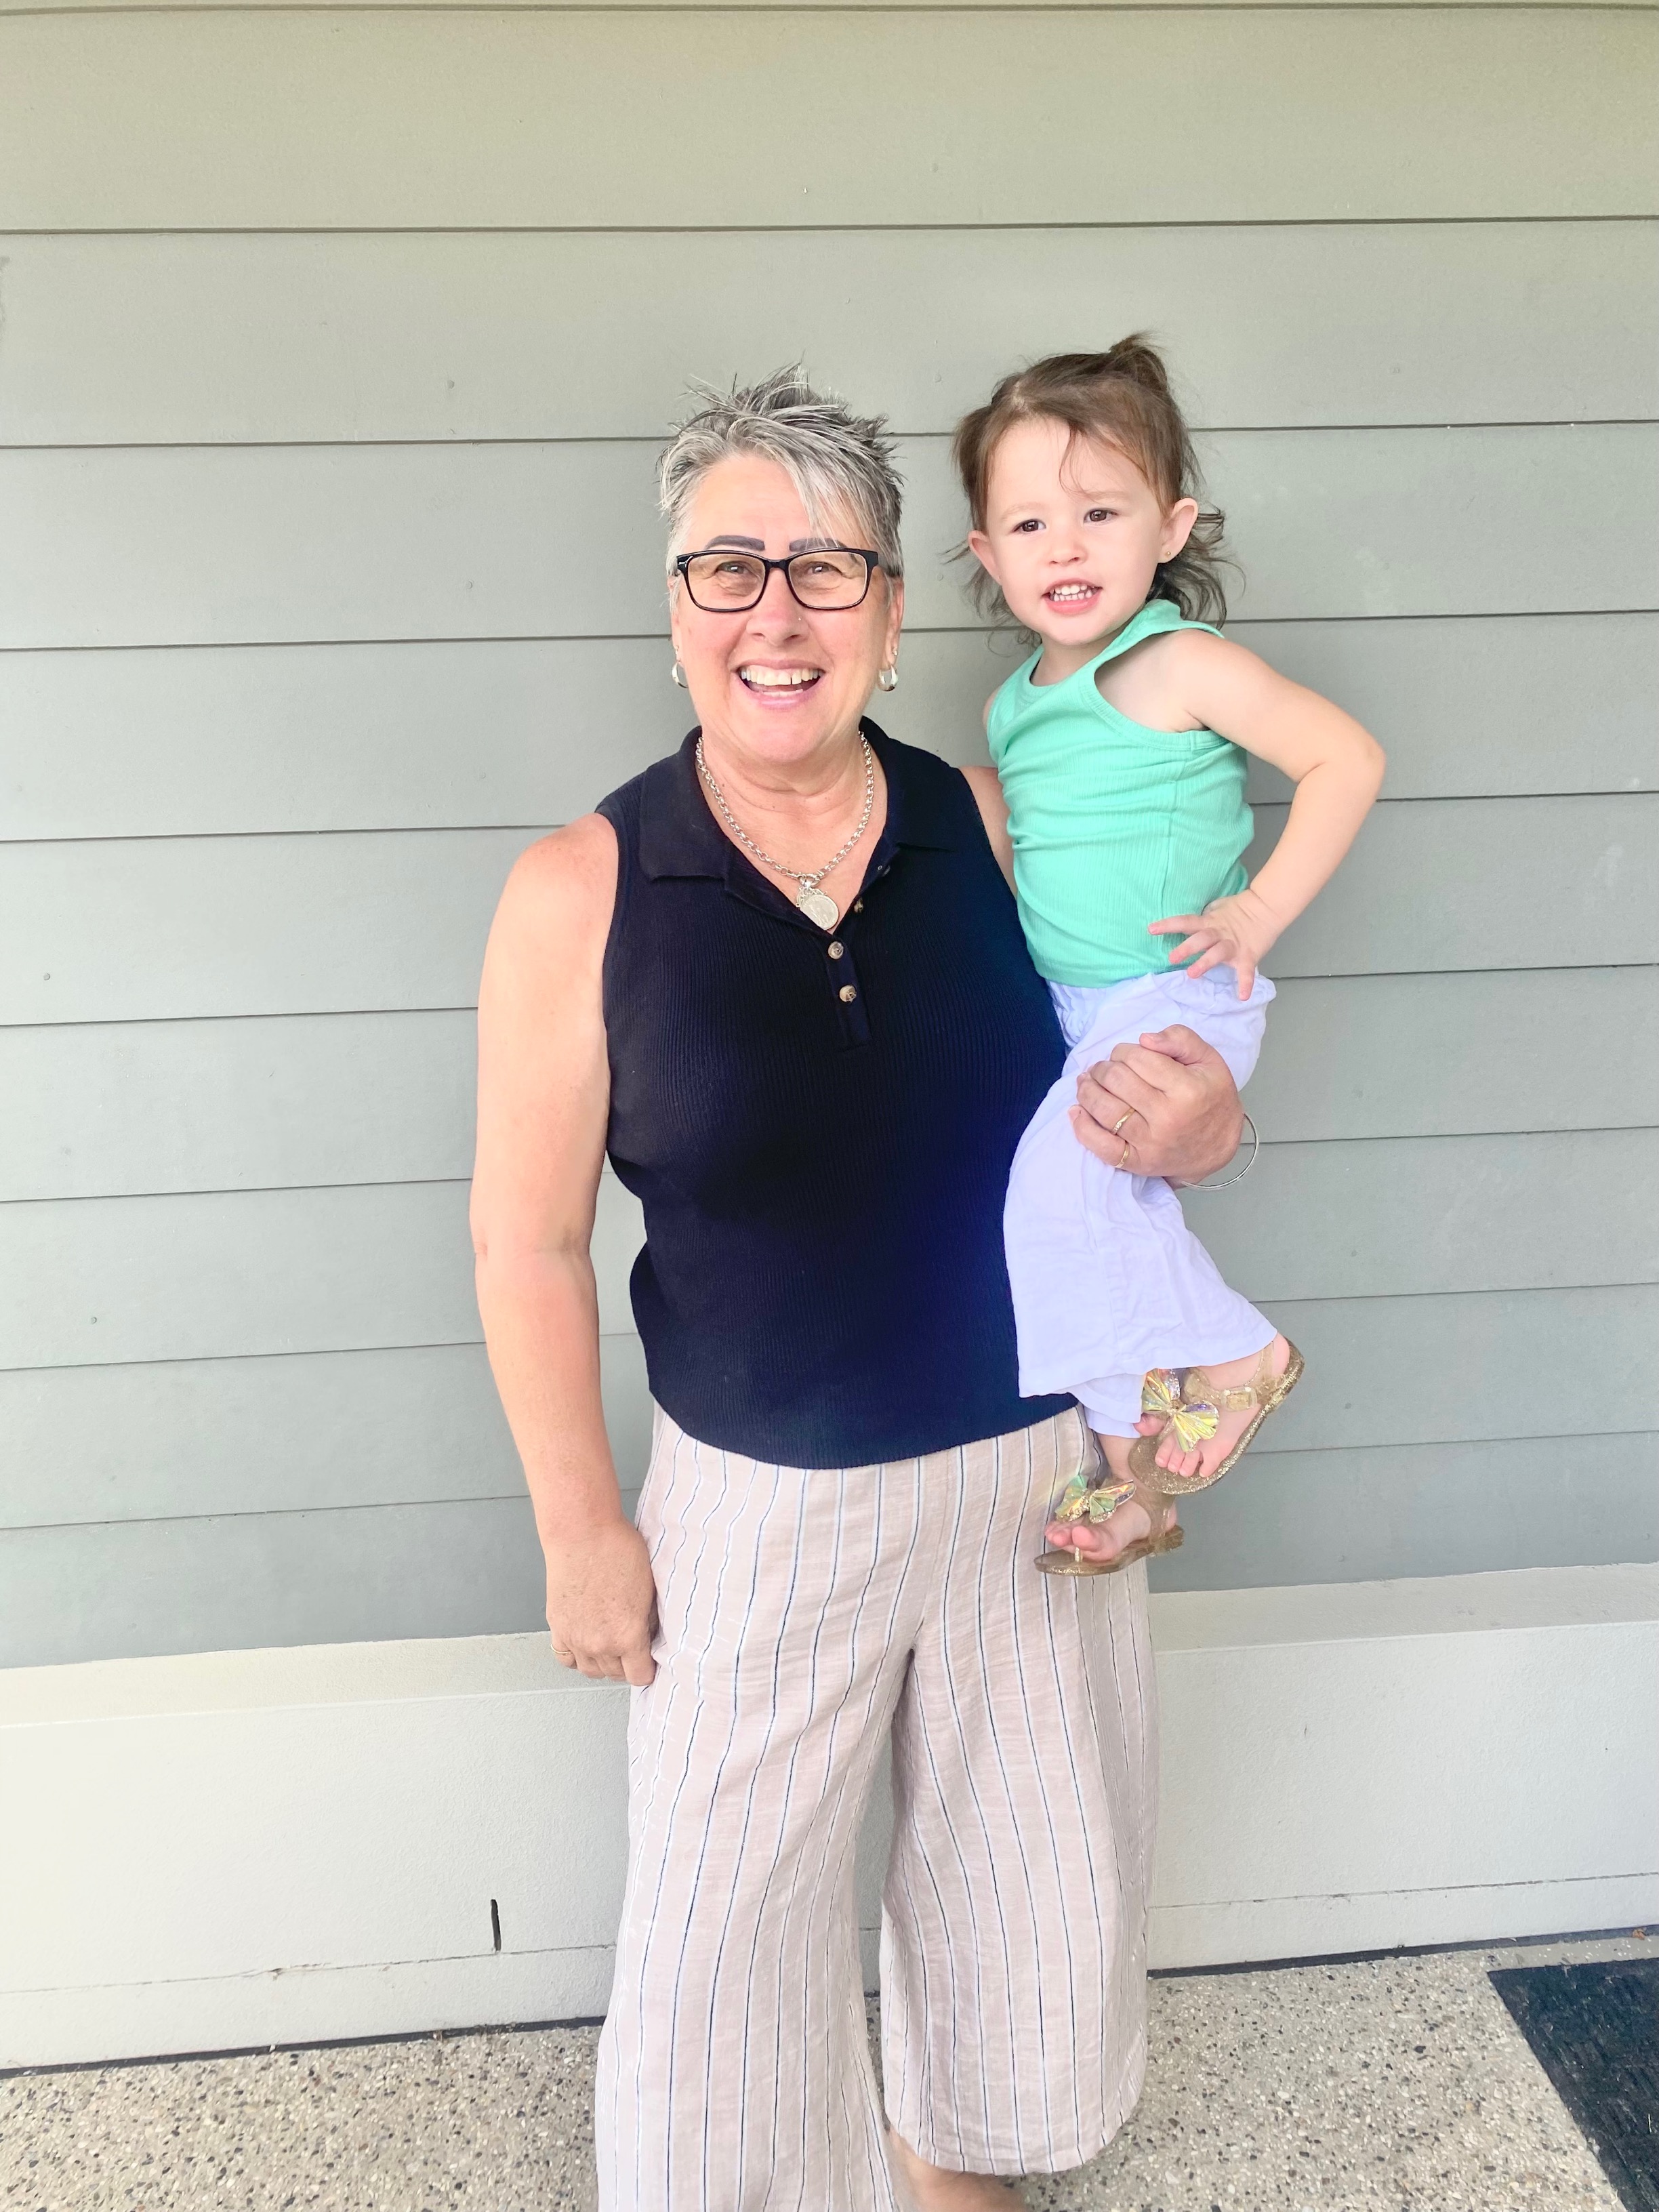 Karen and her two-year-old granddaughter